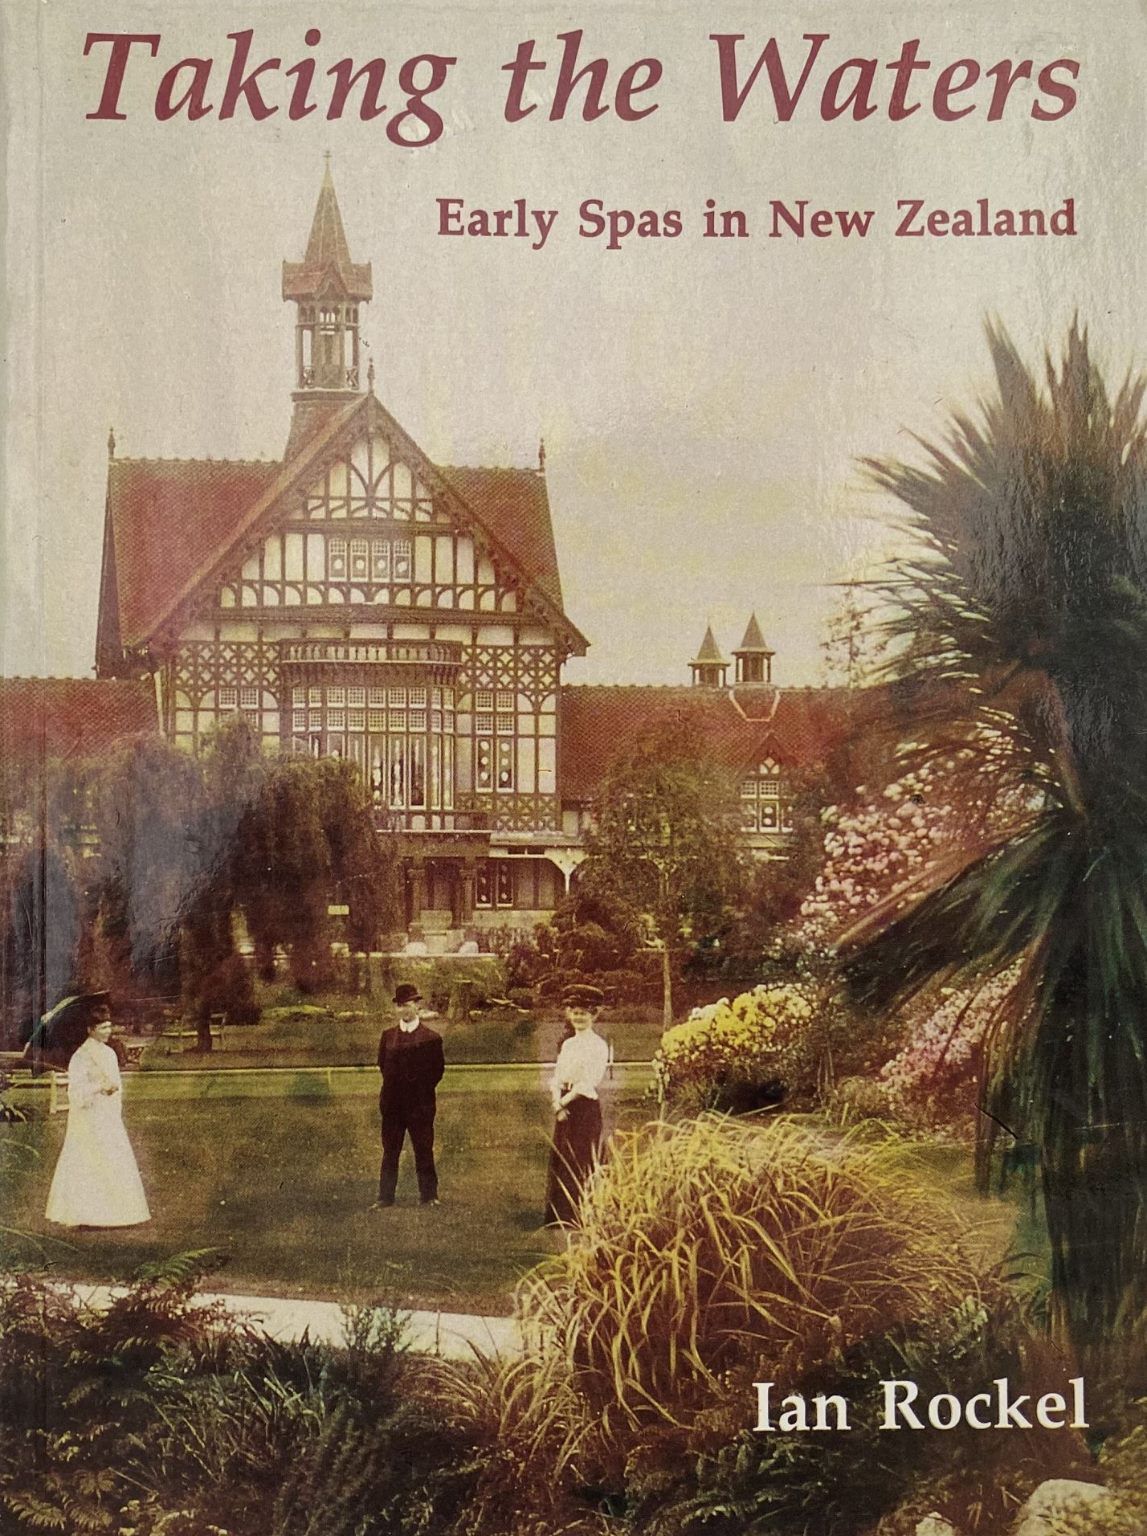 TAKING THE WATERS: Early Spas in New Zealand